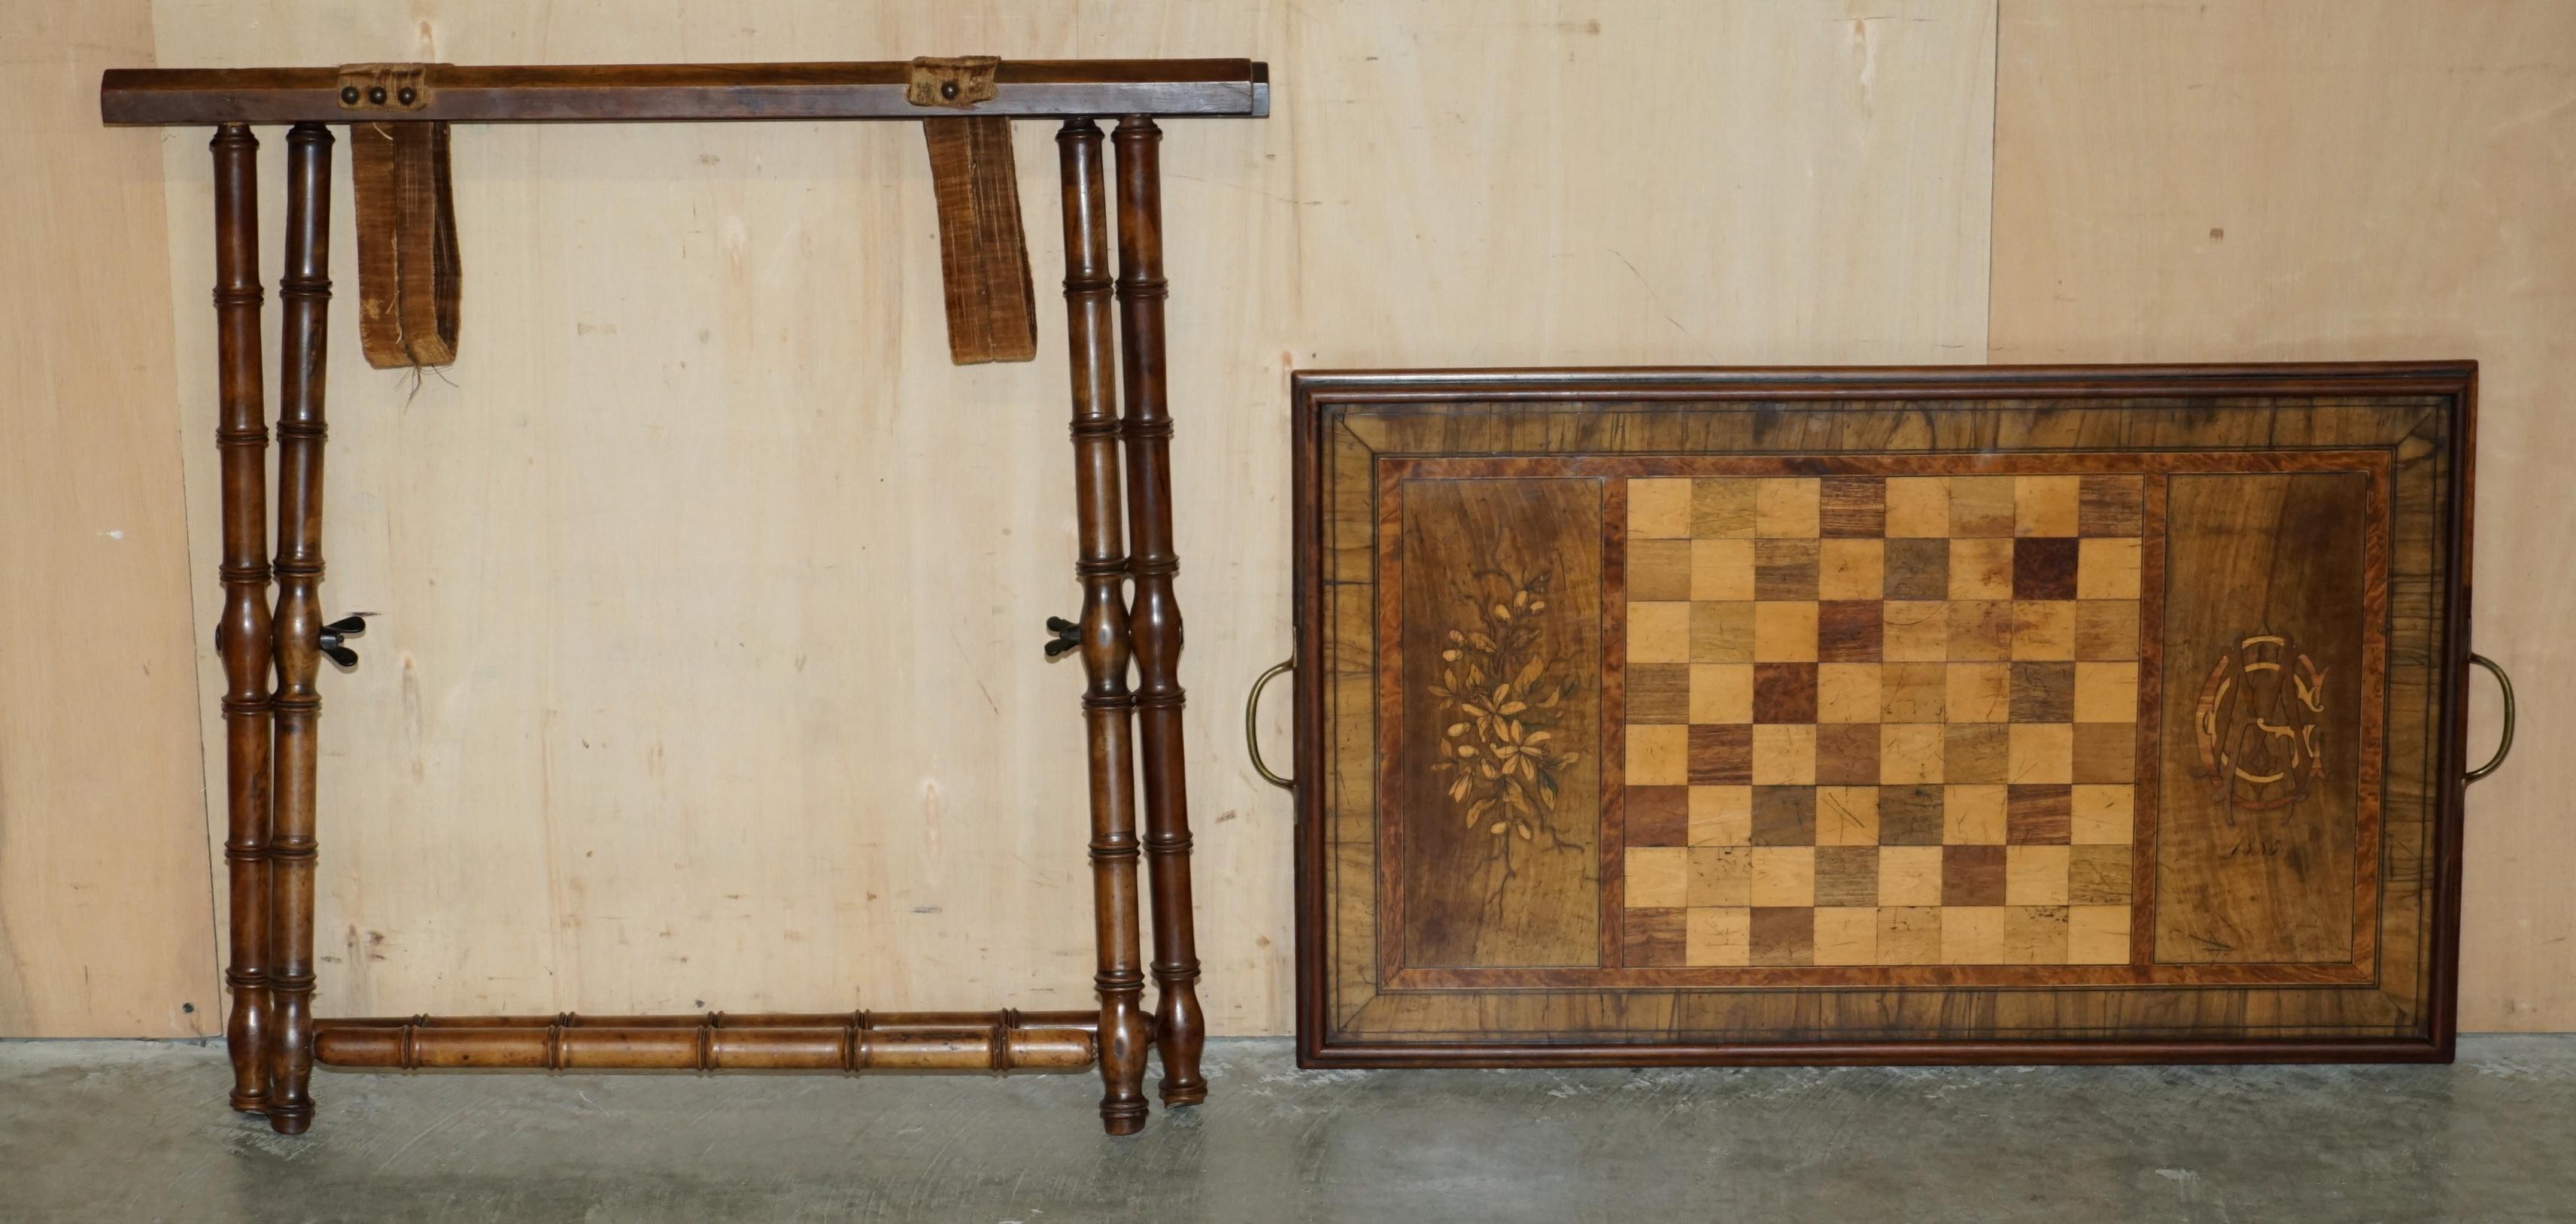 1885 DATED ANTiQUE WALNUT HARDWOOD CHESSBOARD FOLDING GAMES CHESS TRAY TABLE For Sale 8